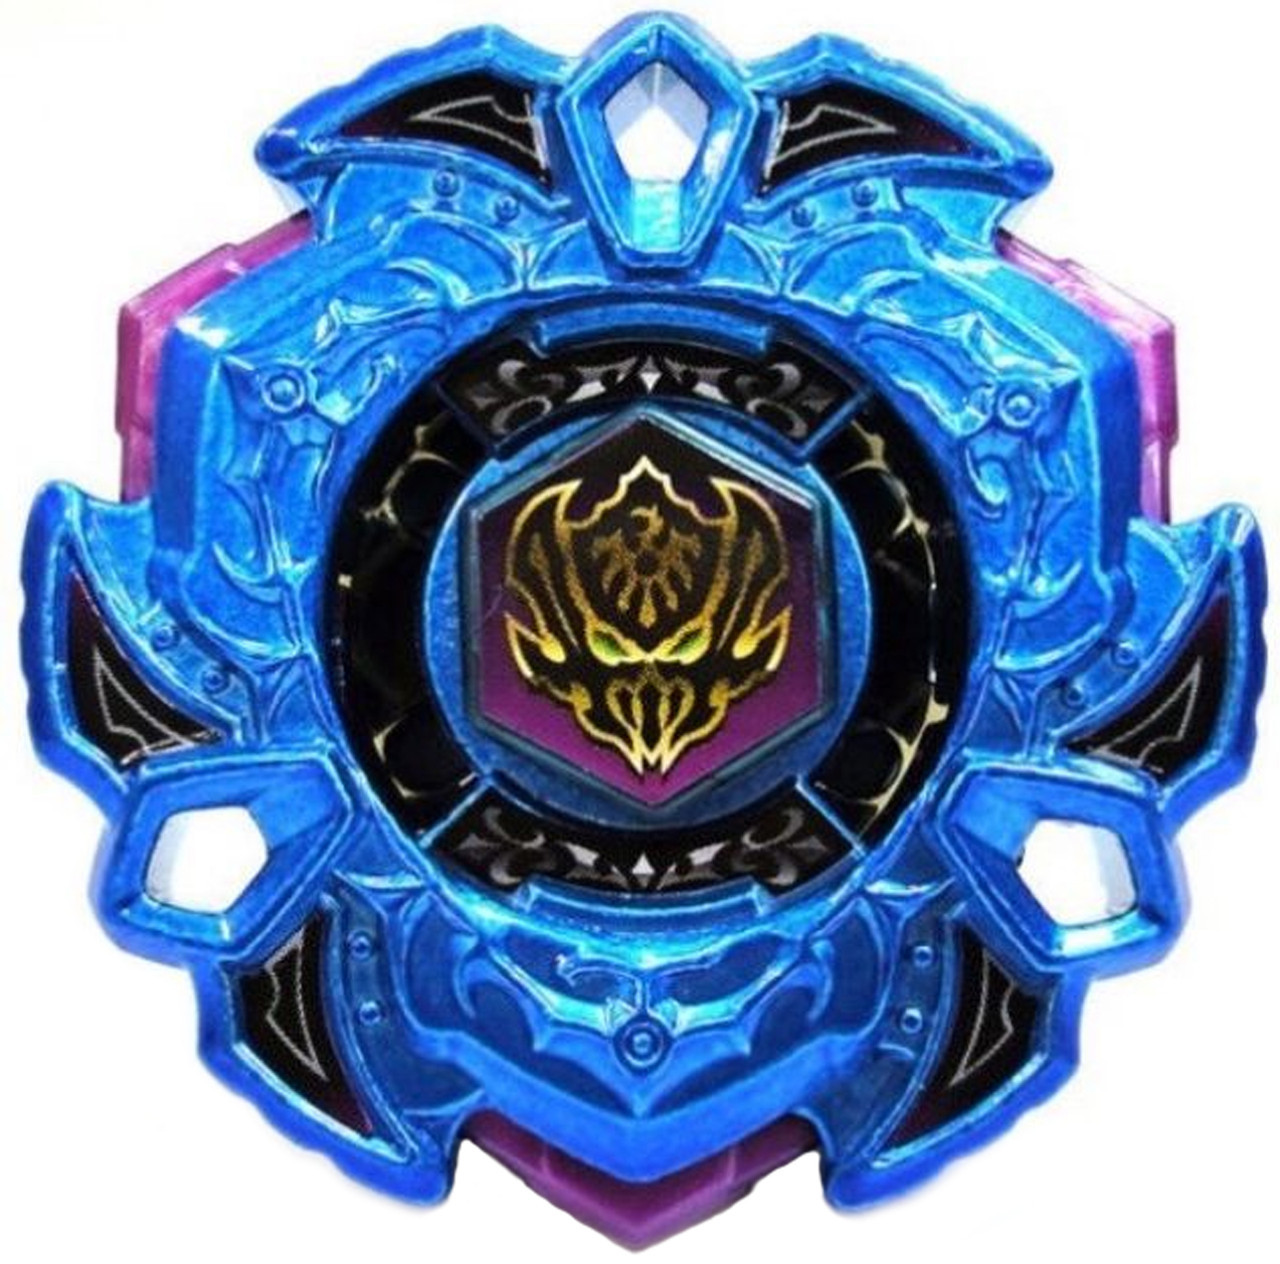 Primary image for Variares D:D Limited Edition BLUE PHANTOM Version Metal Fury Beyblade